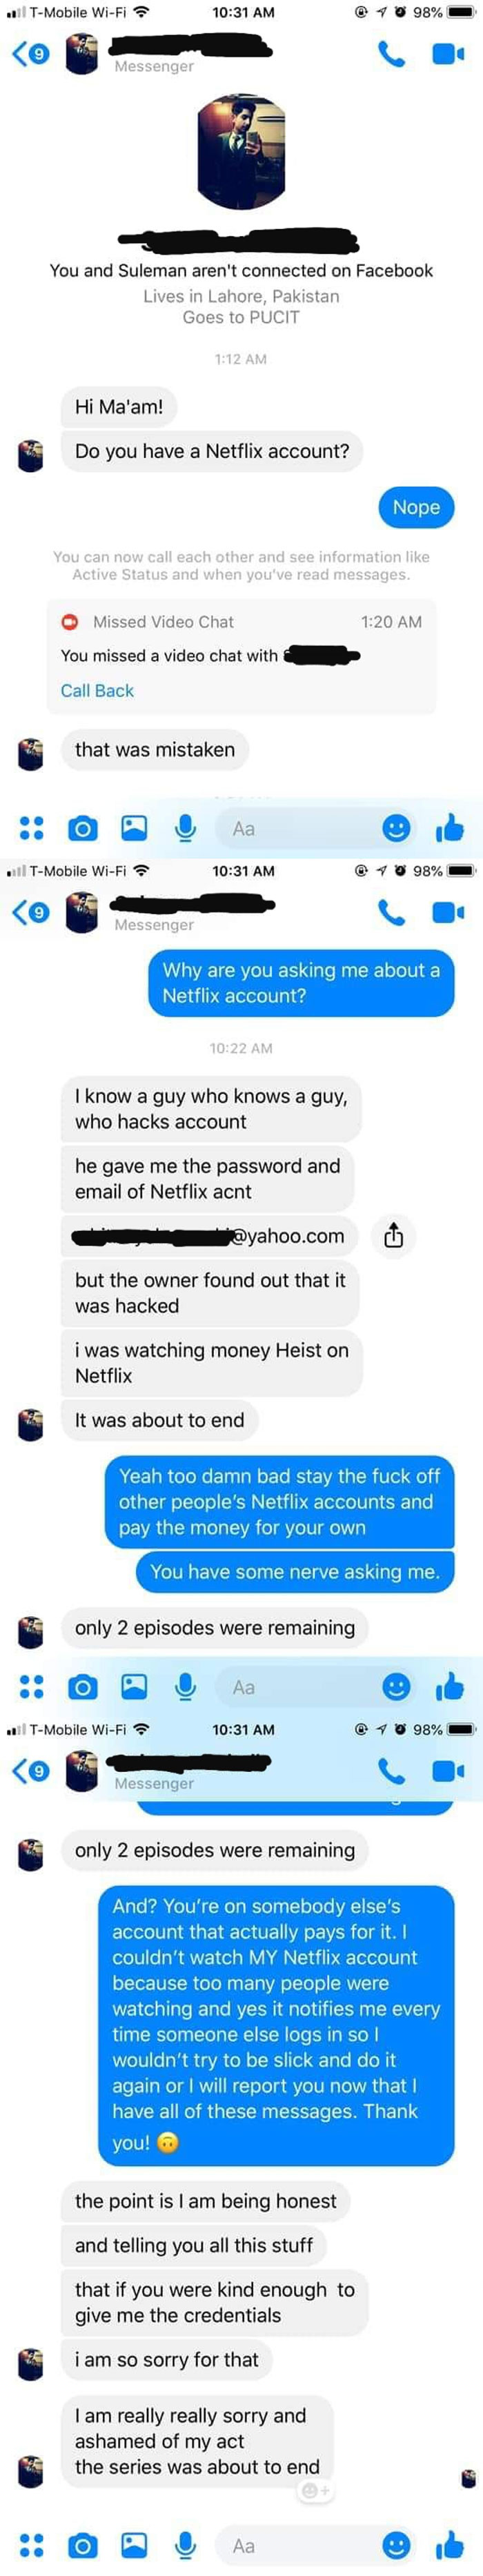 2. Changed my Netflix password and hacker messages me to change it back